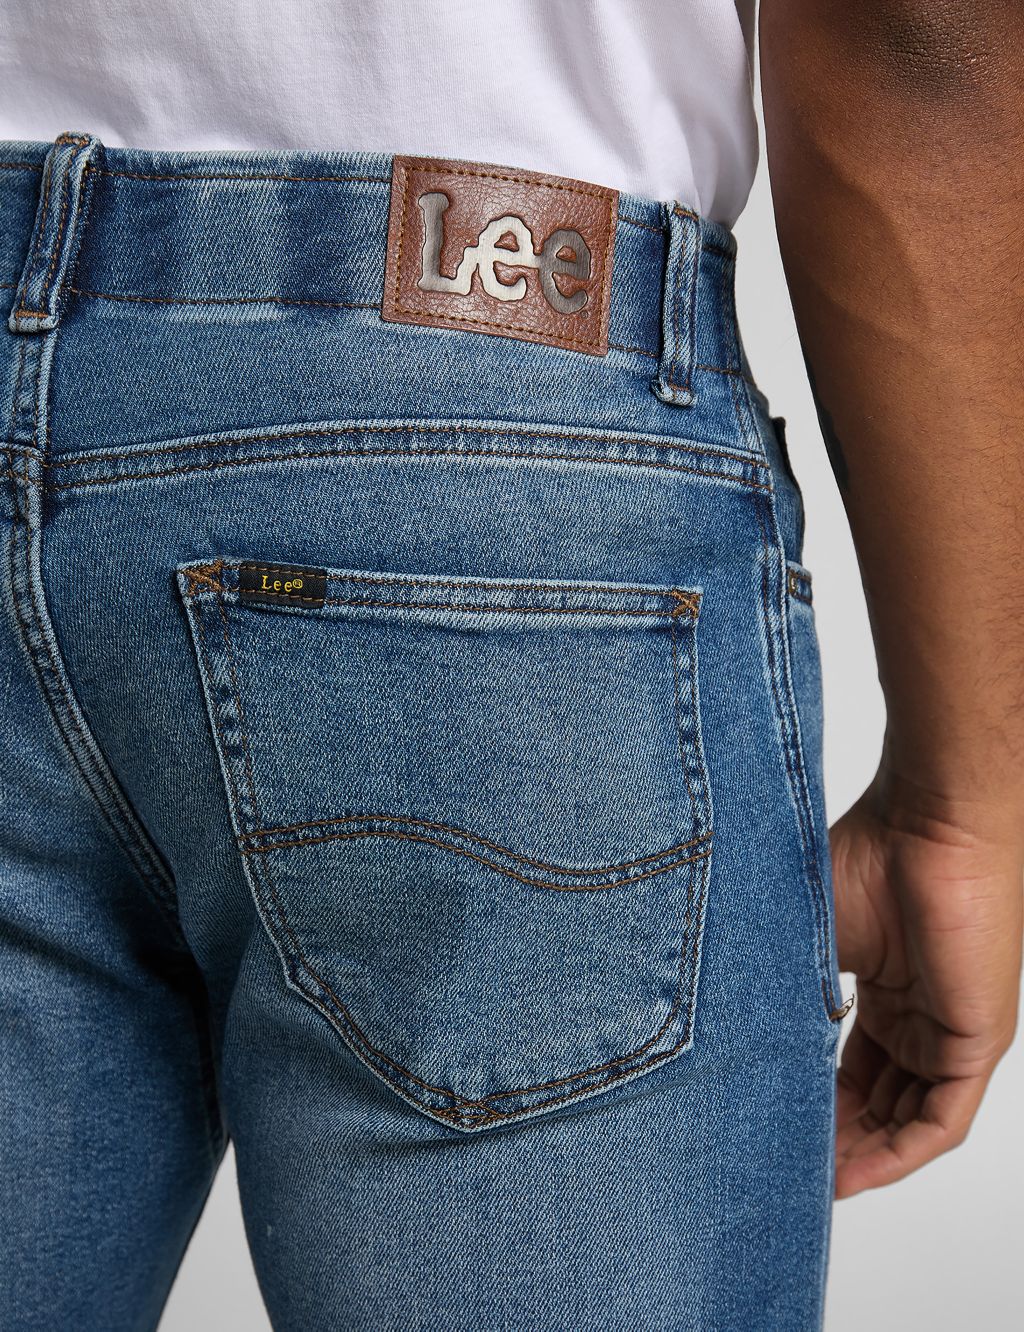 Straight Fit XM 5 Pocket Jeans image 5